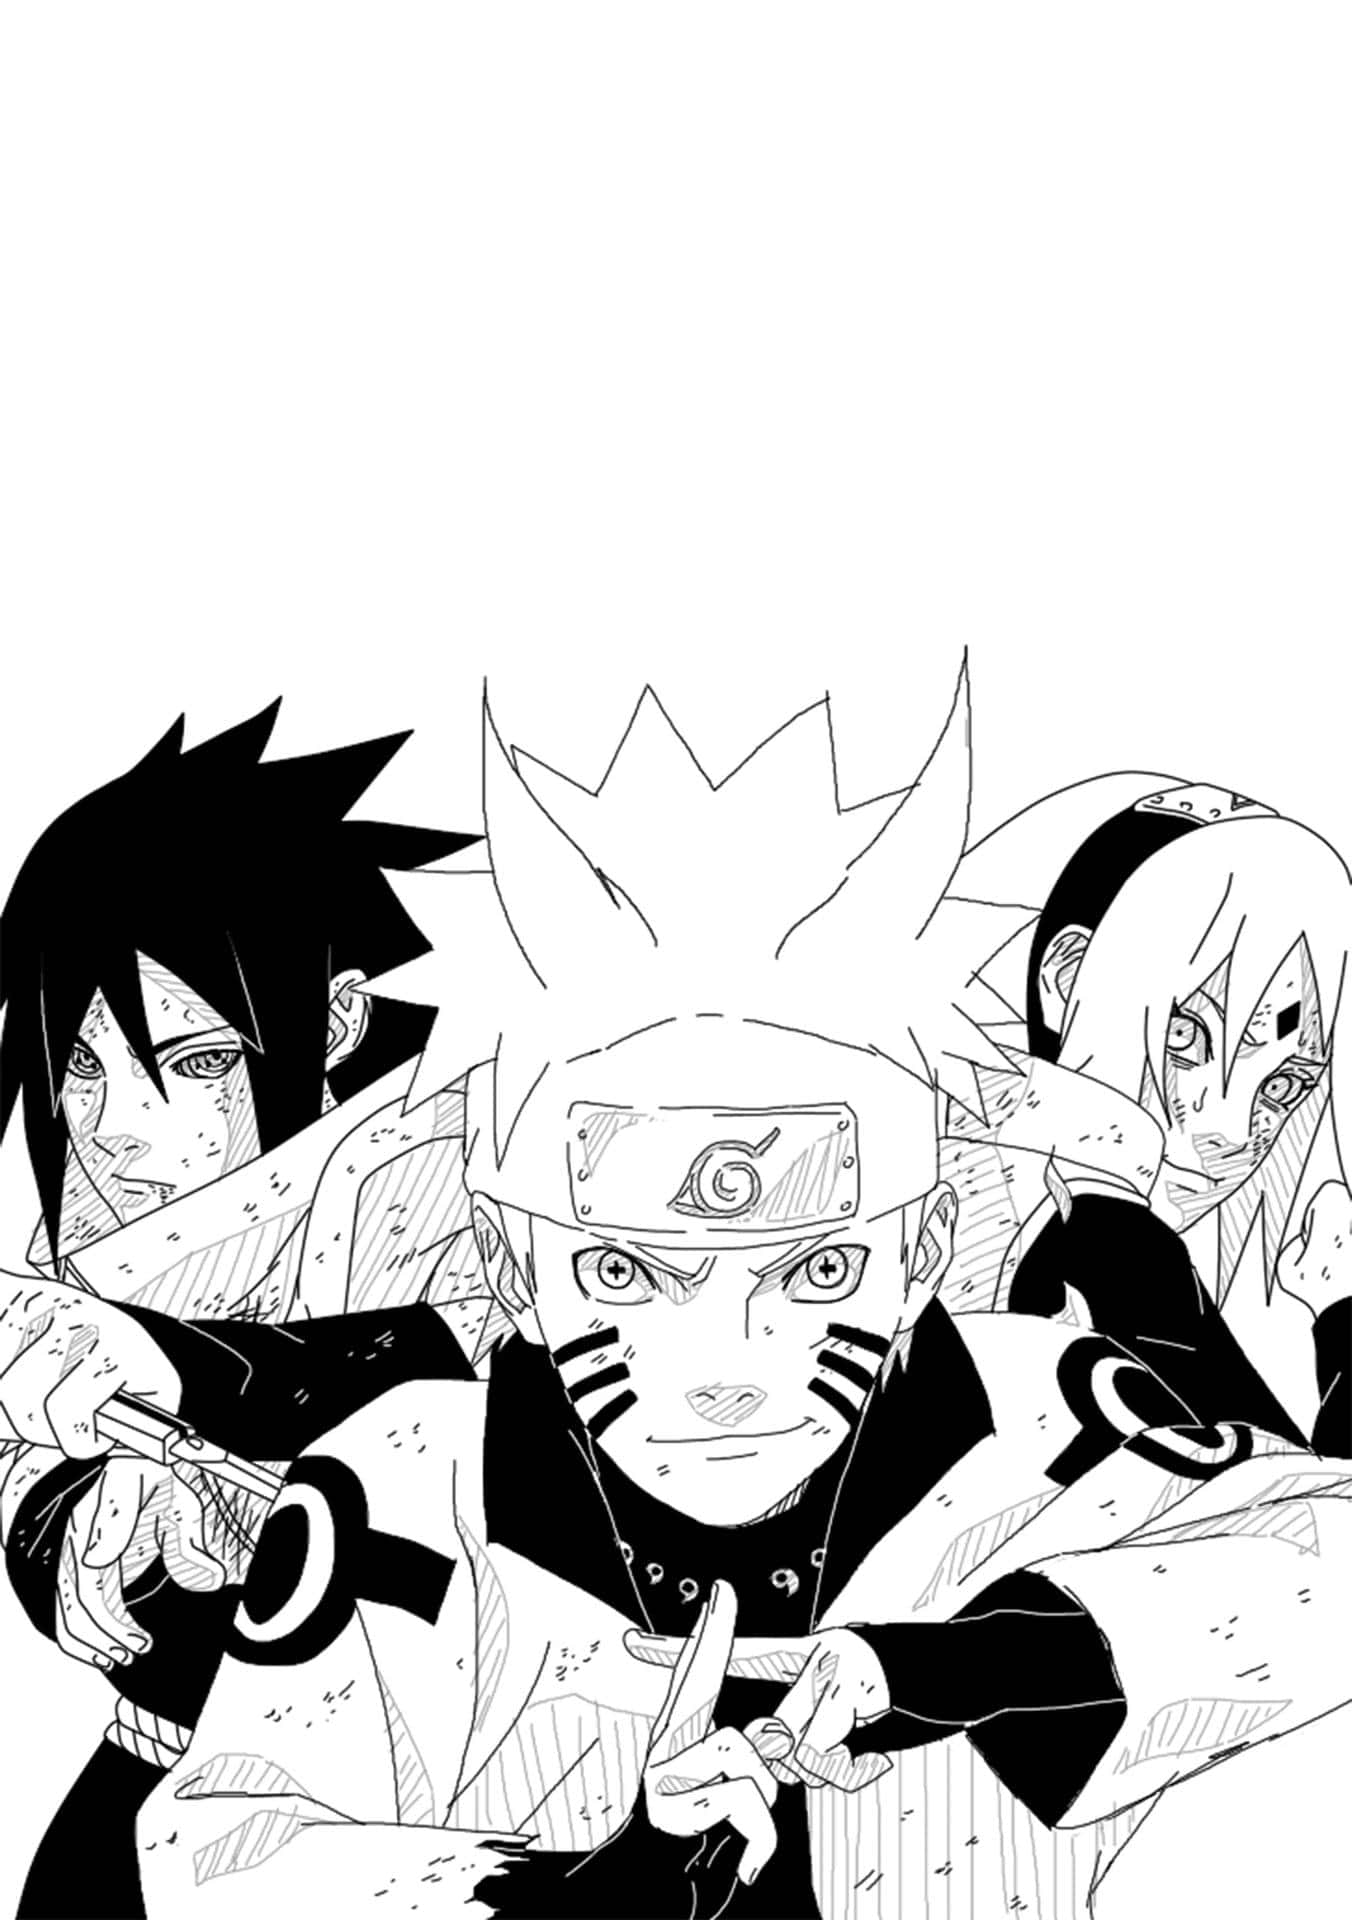 Together, We are Team 7 of Naruto Wallpaper